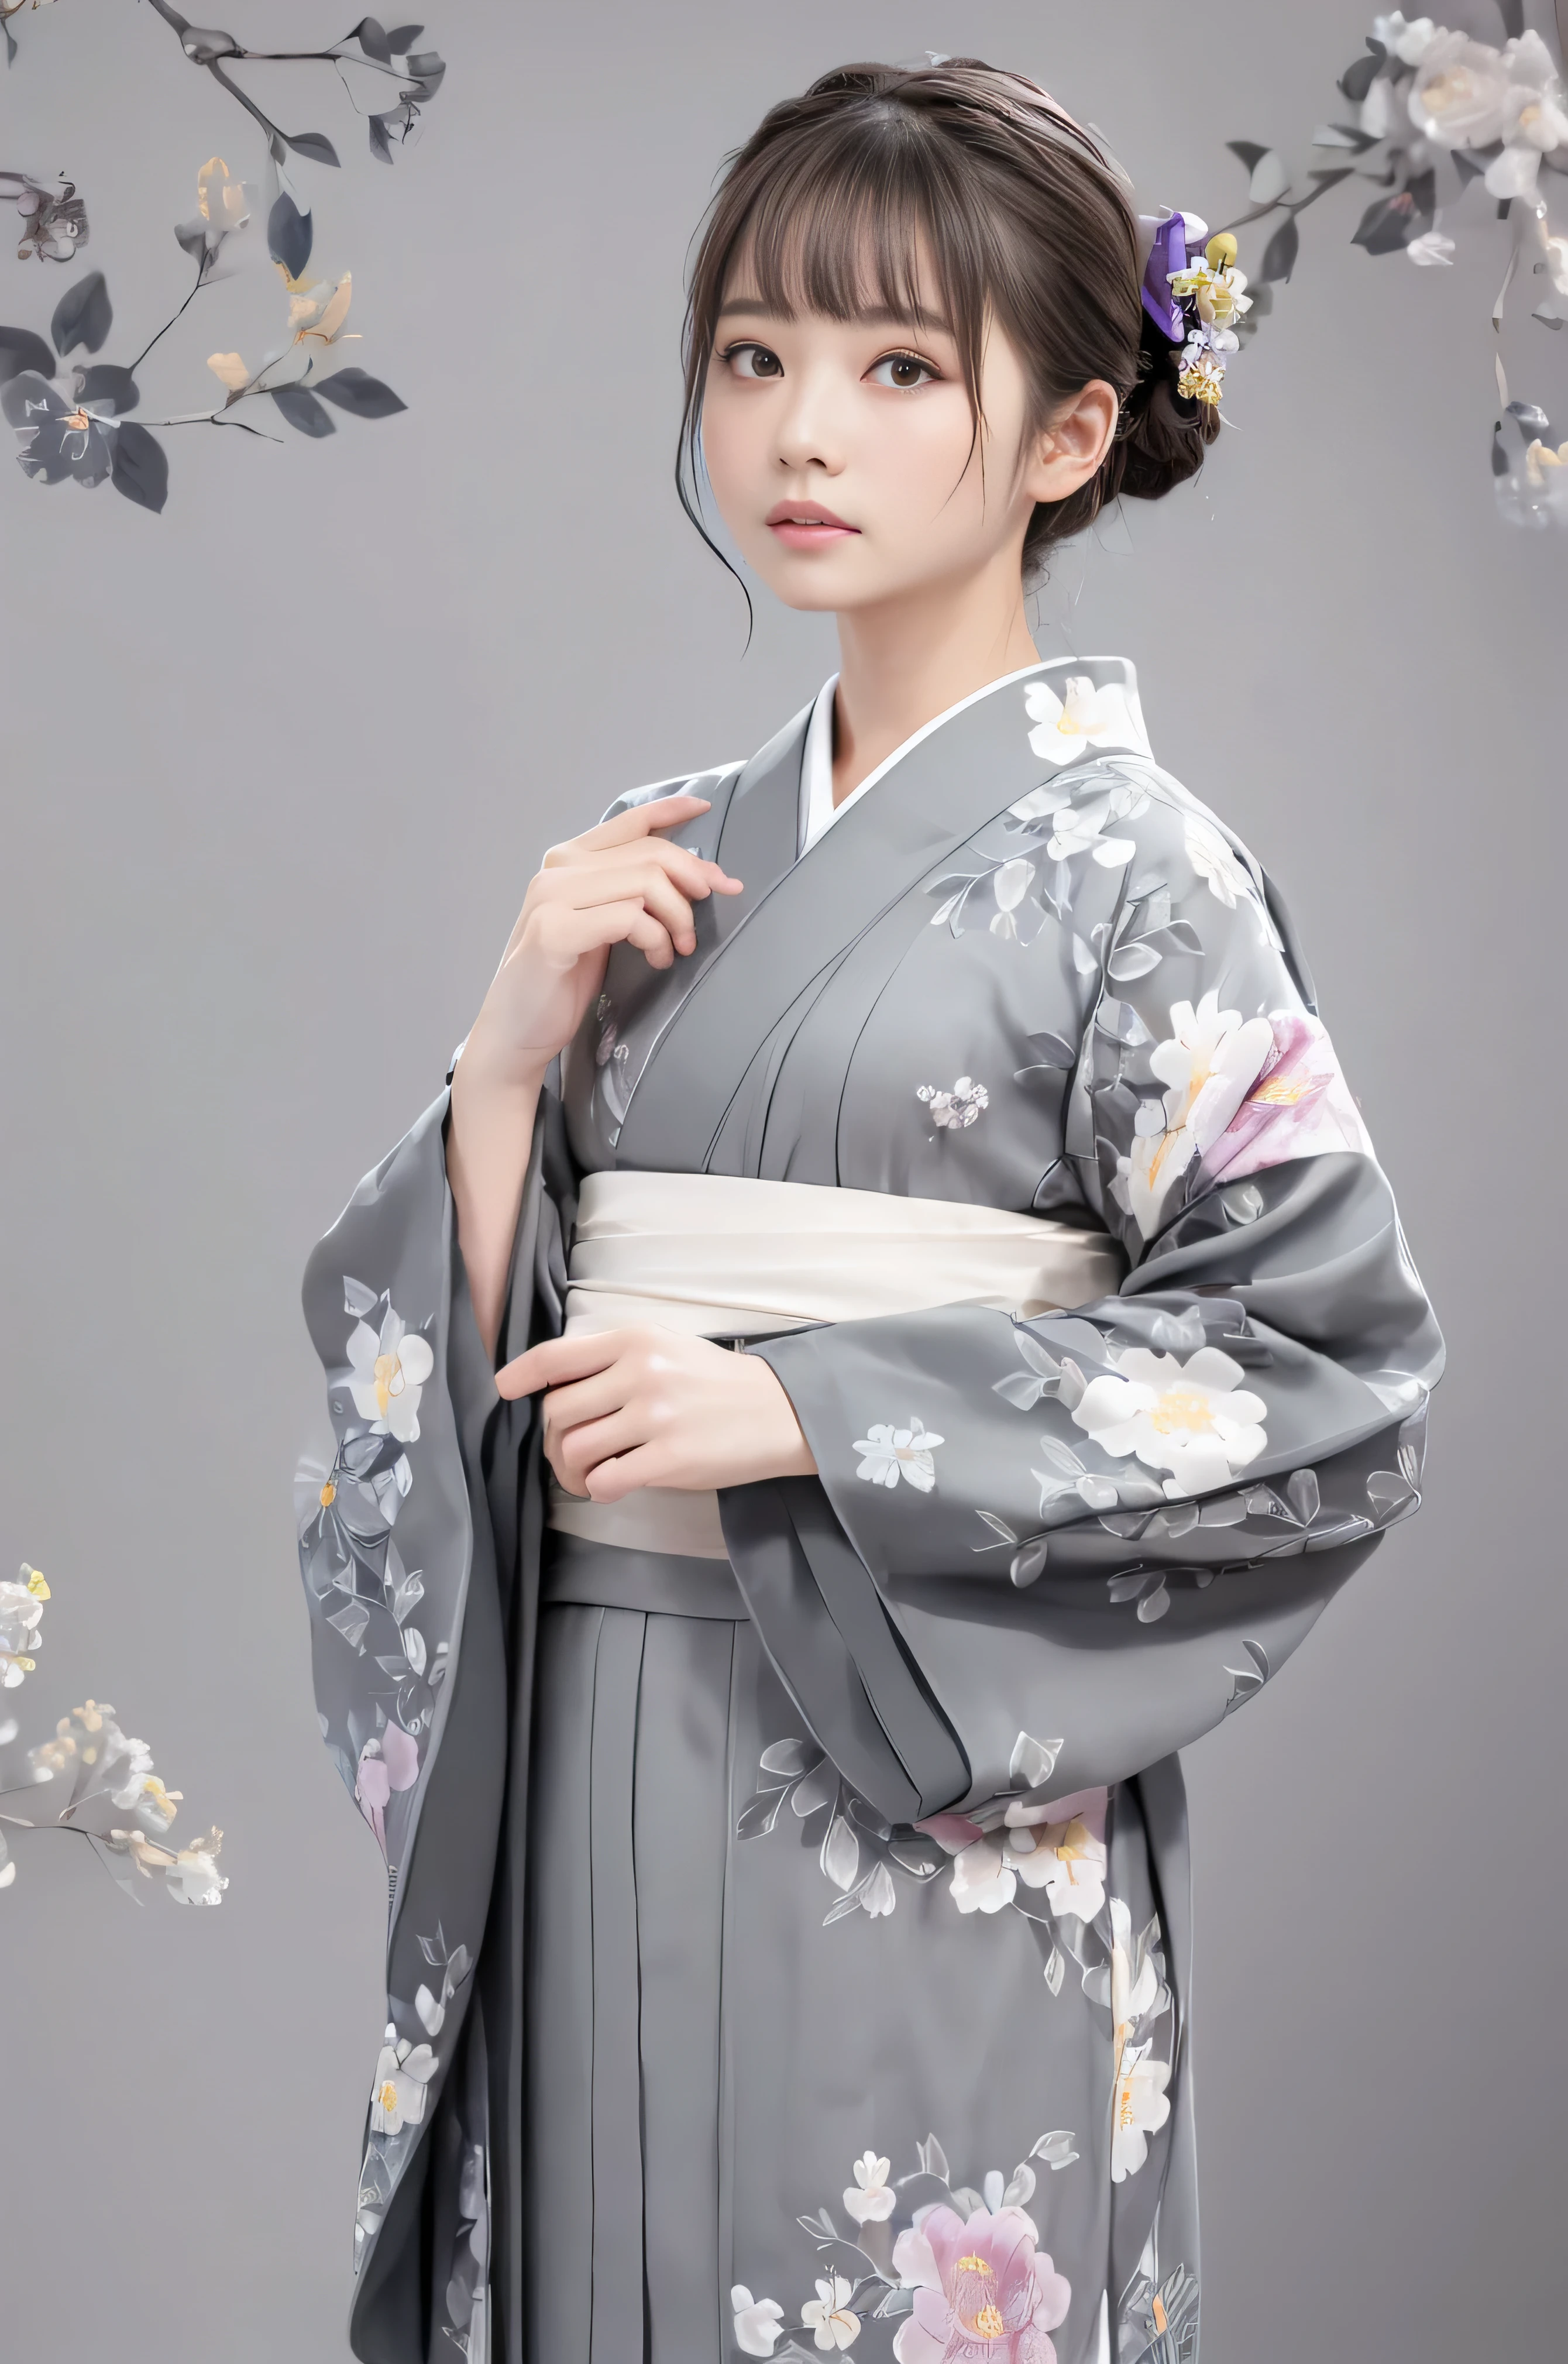 (((gray floral background:1.3)))、highest quality, Tabletop, High resolution, (((One Girl))), 16 years old,(((Eyes are grey:1.3)))、Gray kimono、((Beautiful Gray Kimono)), Tyndall effect, Realistic, Shadow Studio,Ultramarine Lighting, Dual Tone Lighting, (High Definition Skins: 1.2)、Pale colored lighting、Dim lighting、 Digital SLR, photograph, High resolution, 4K, 8k, Background Blur,Fade out beautifully、gray flower world